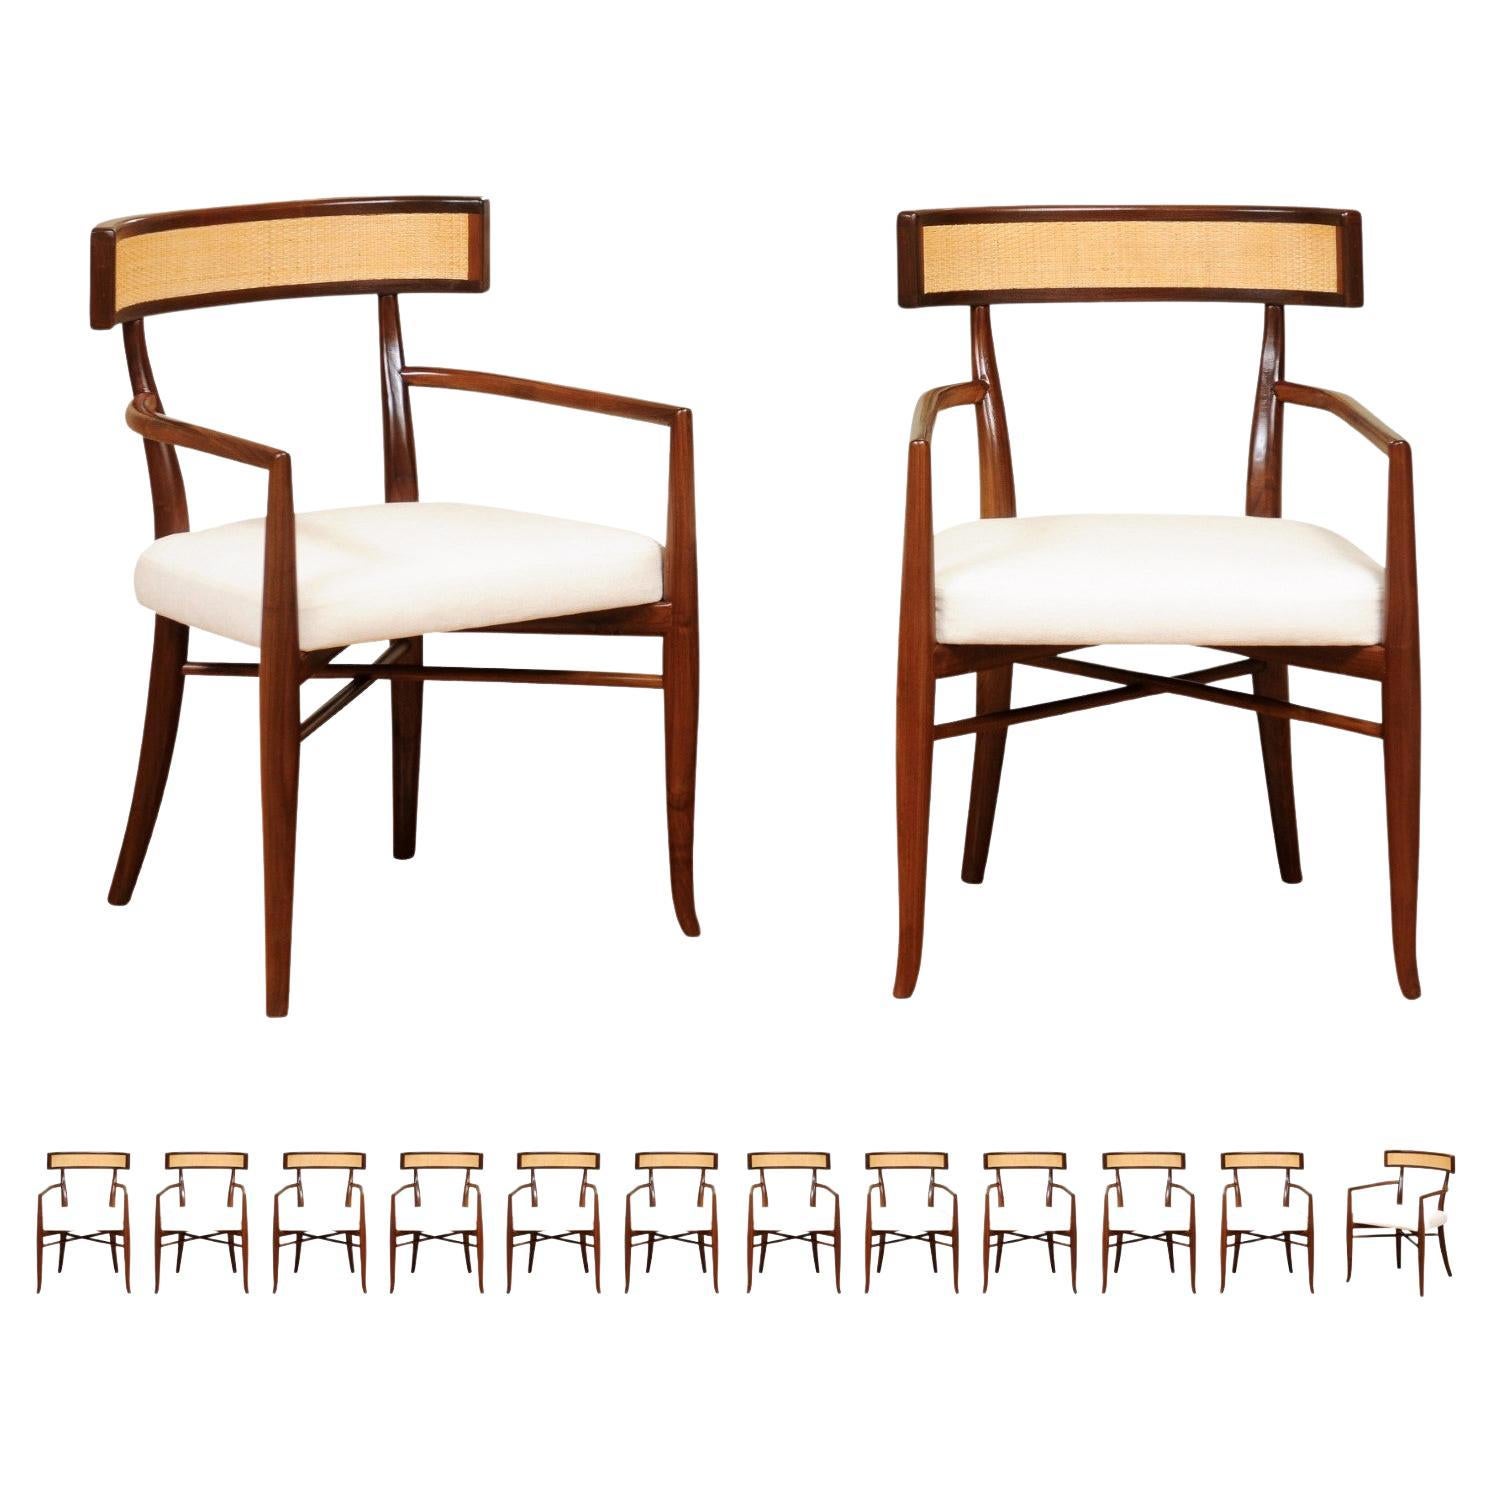 All Arms, Incredible Set of 14 Klismos Chairs by Gibbings for Widdicomb 